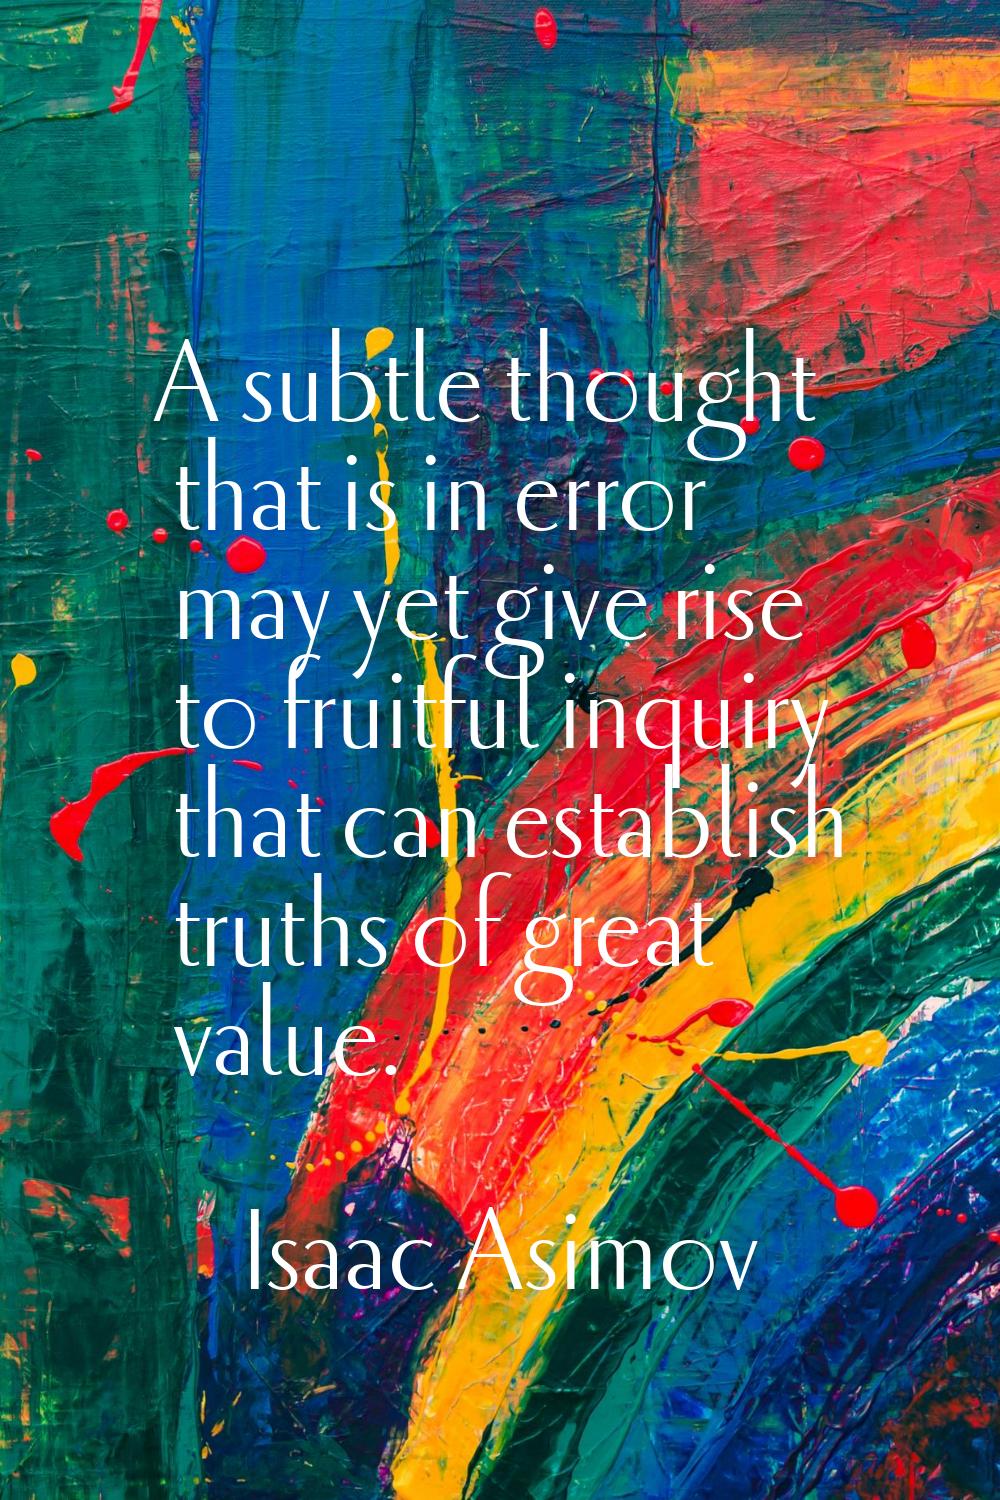 A subtle thought that is in error may yet give rise to fruitful inquiry that can establish truths o